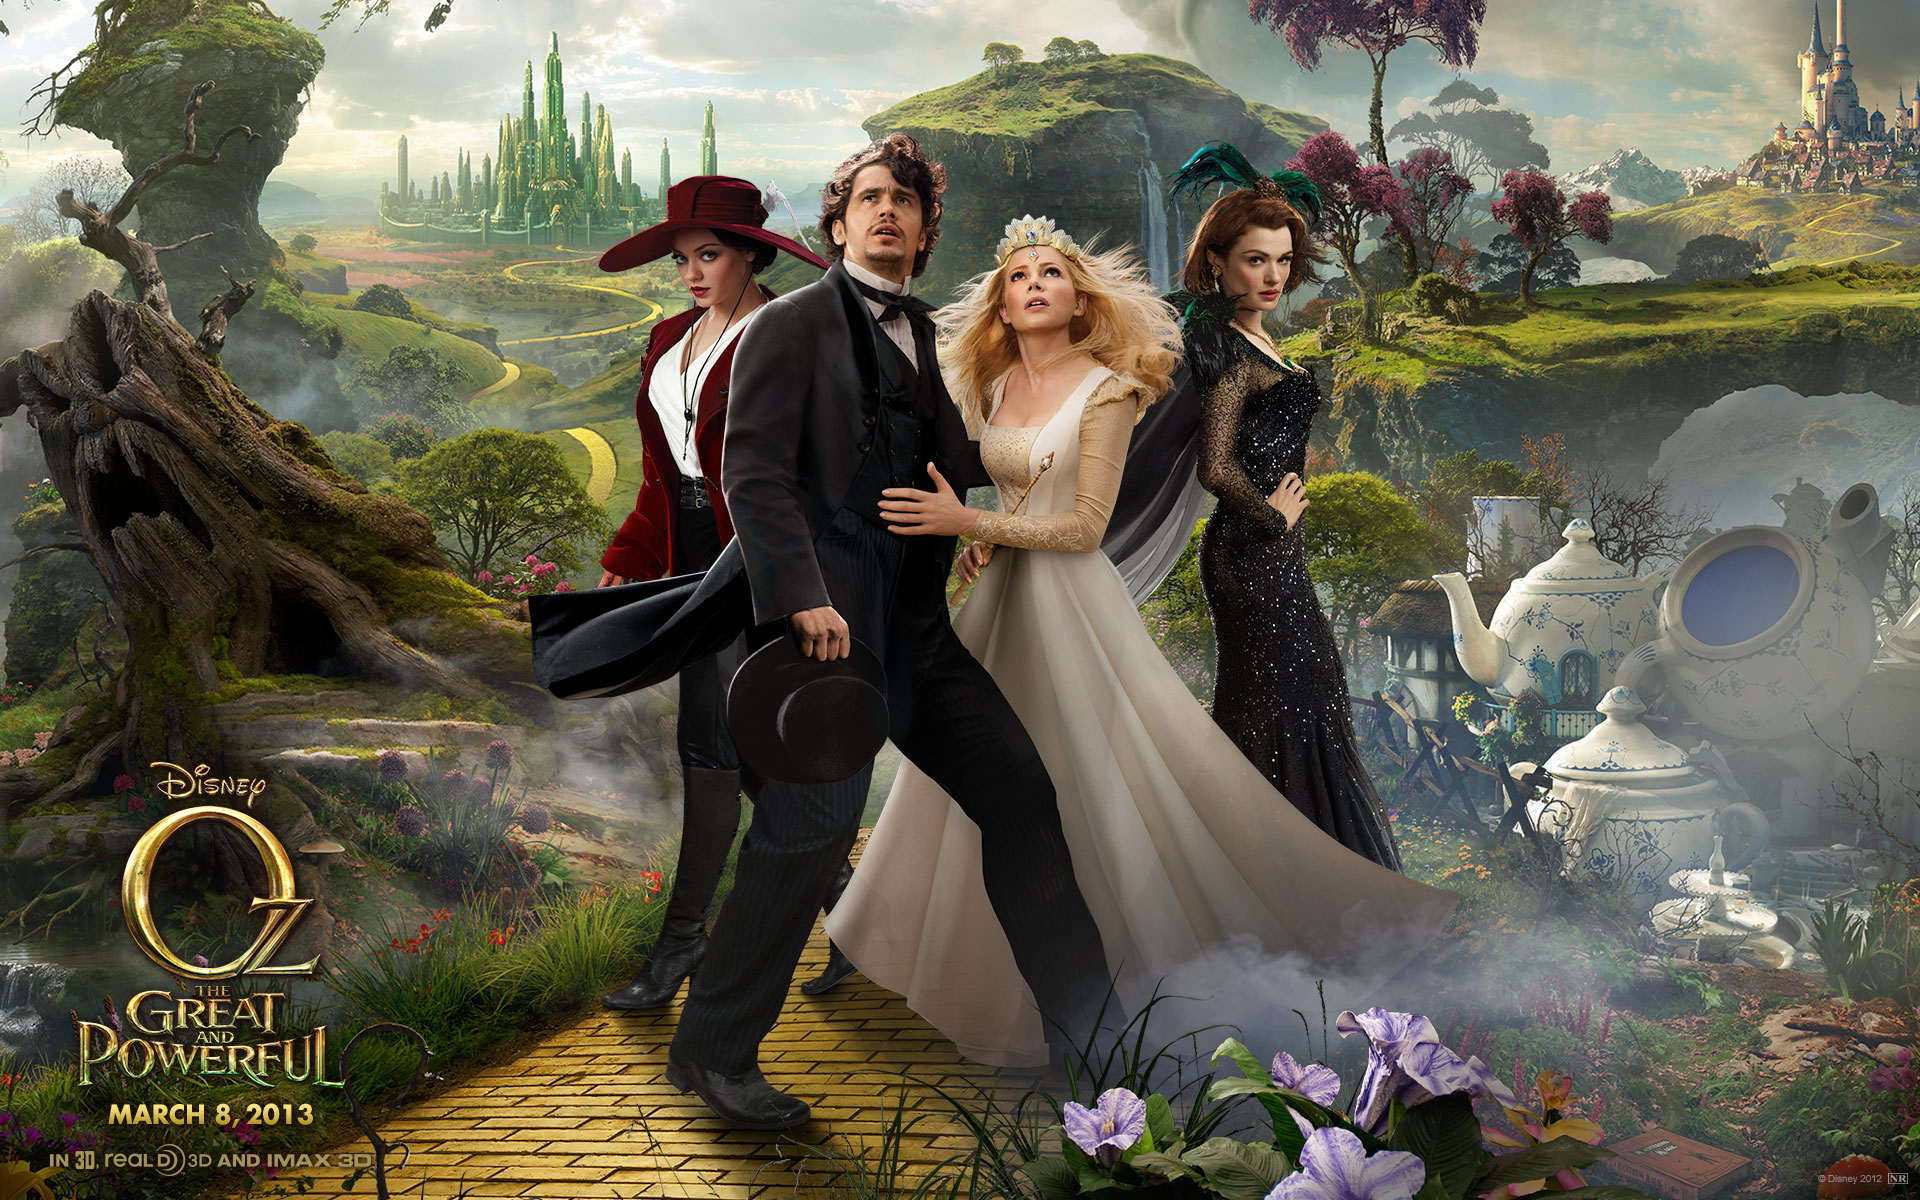 Oz The Great and Powerful D Movie